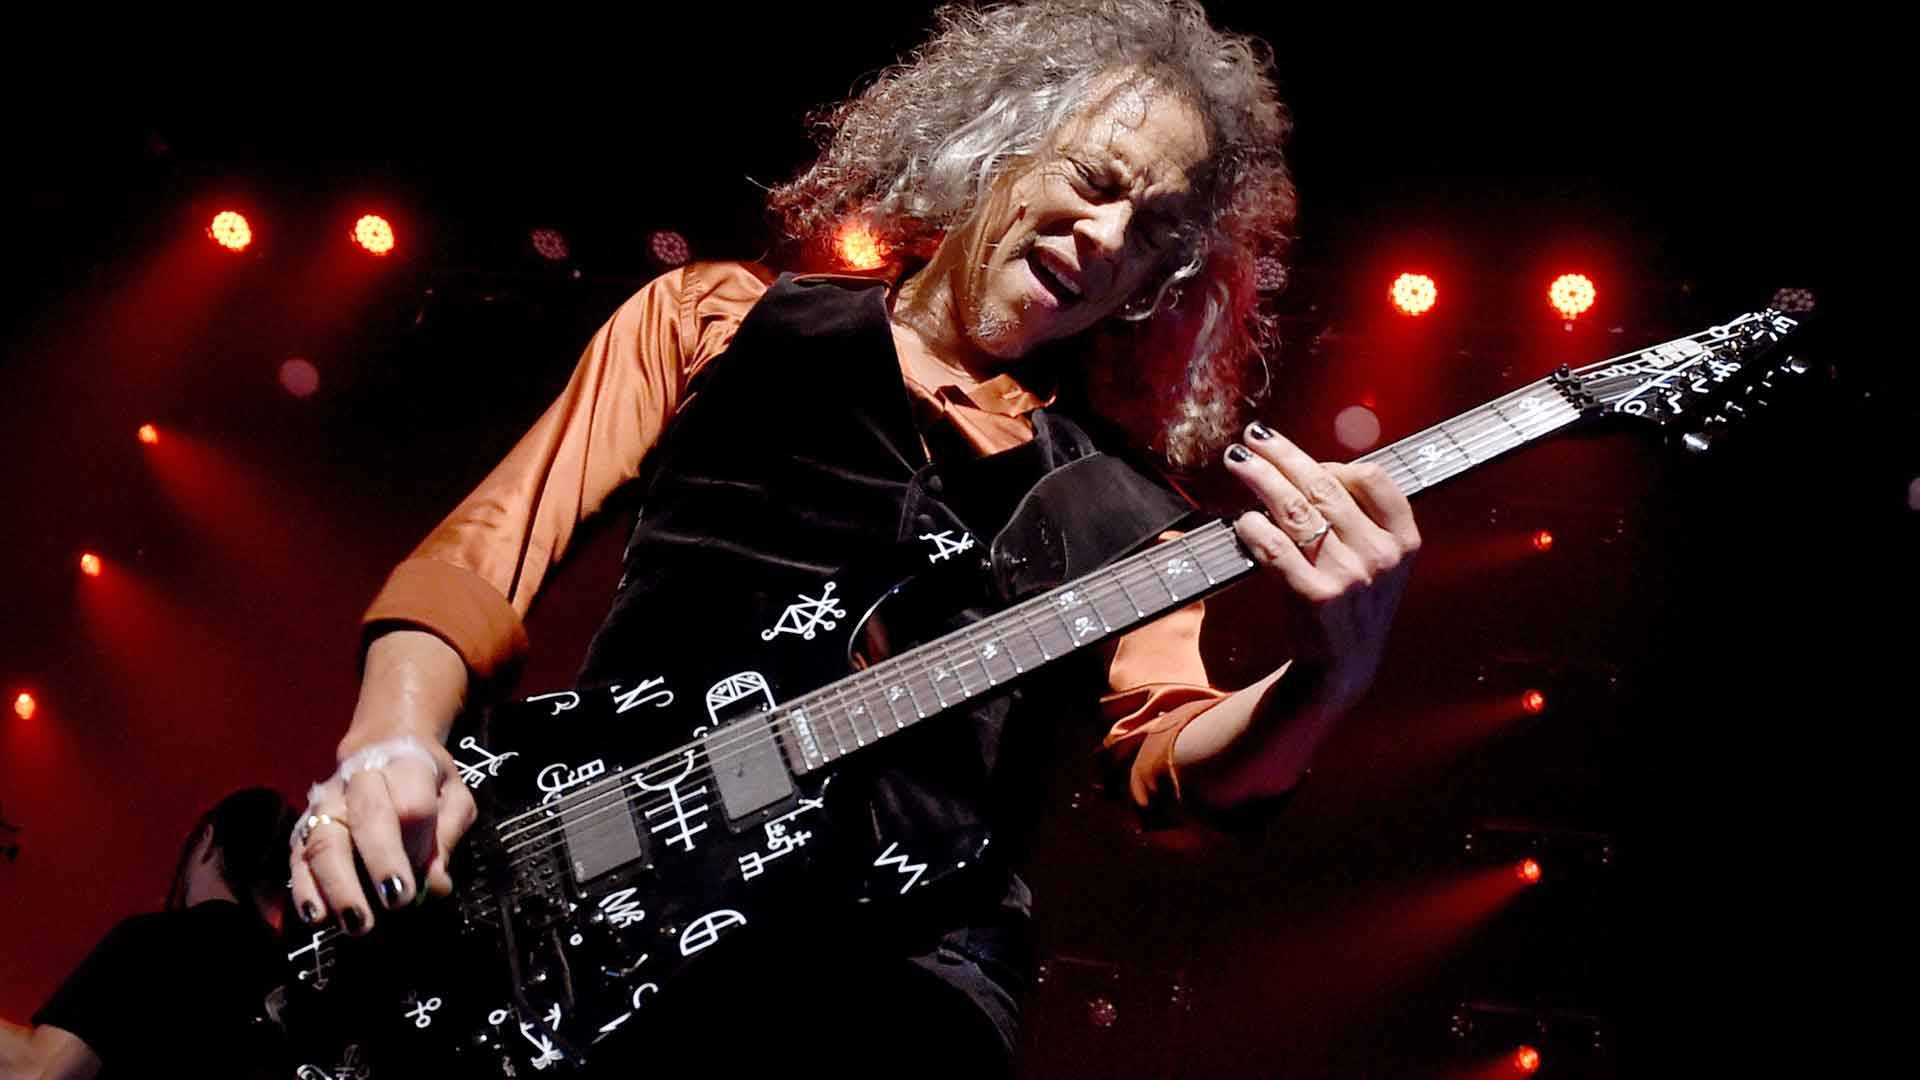 Kirk Hammett of Metallica performs at the Fonda Theatre on December 15, 2016. Kevin Winter/Getty Images)